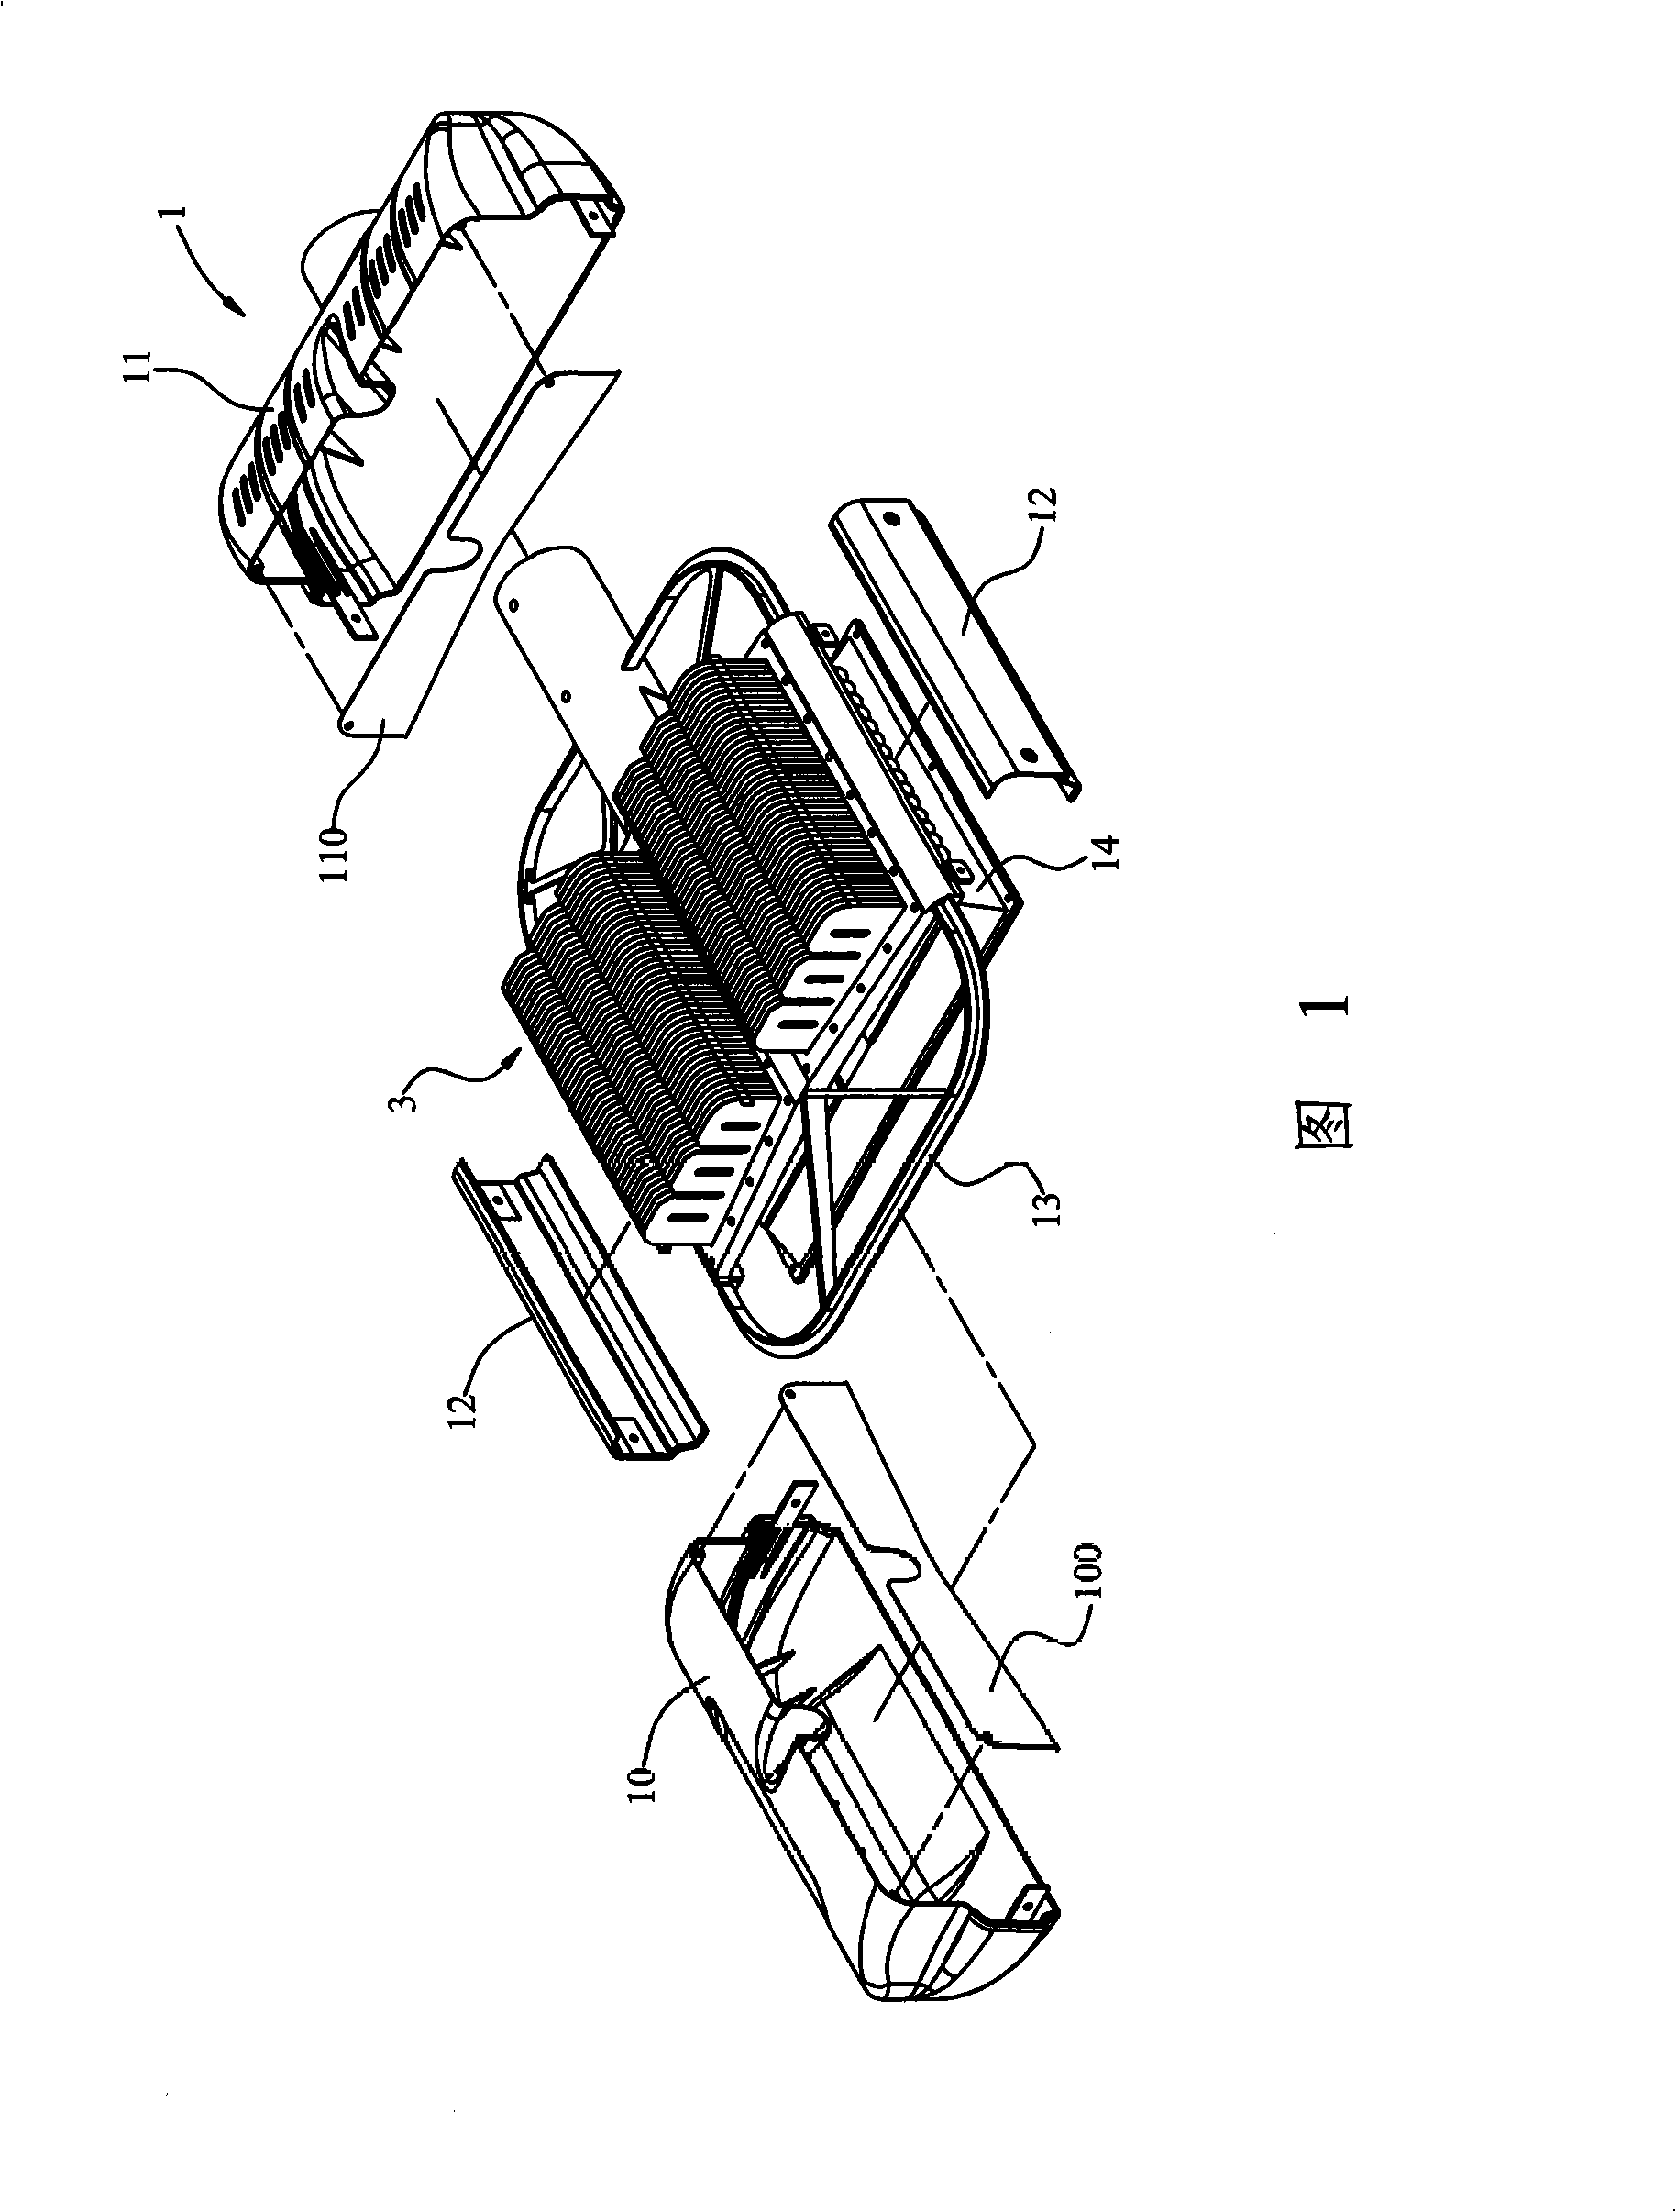 Dual chamber street lamp holder structure